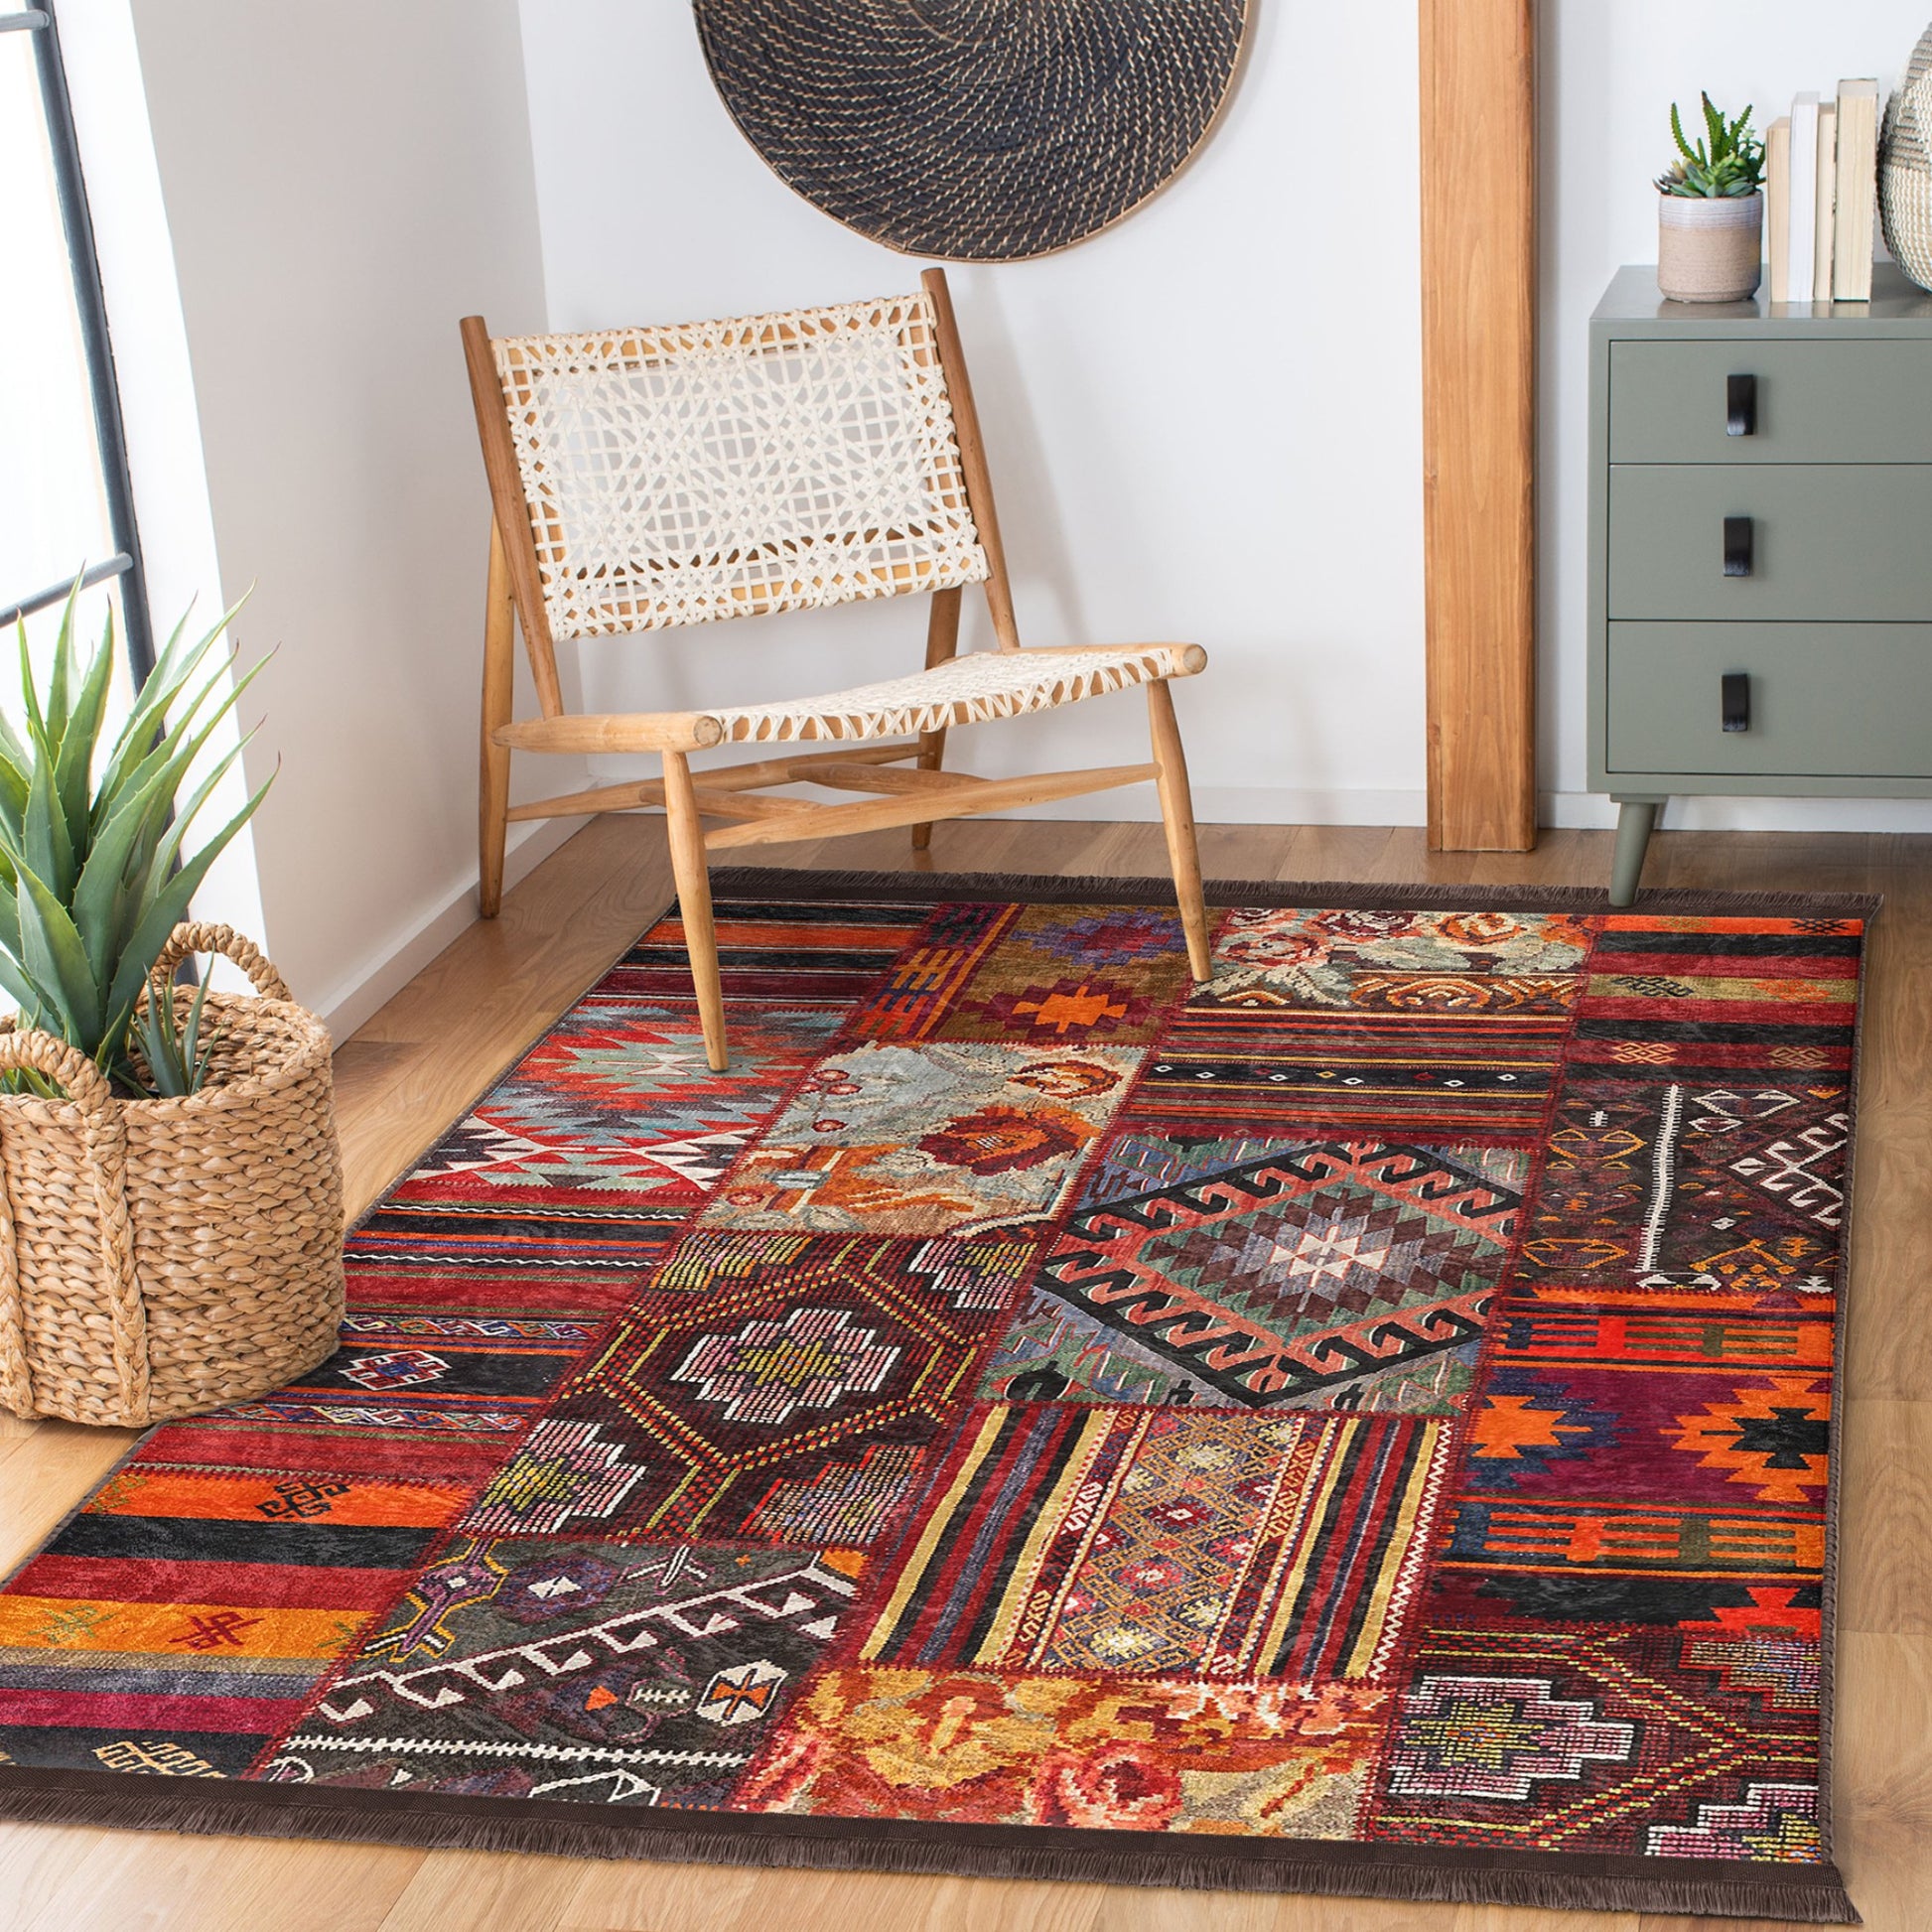 Functional Rug with Timeless Ethnic Craftsmanship